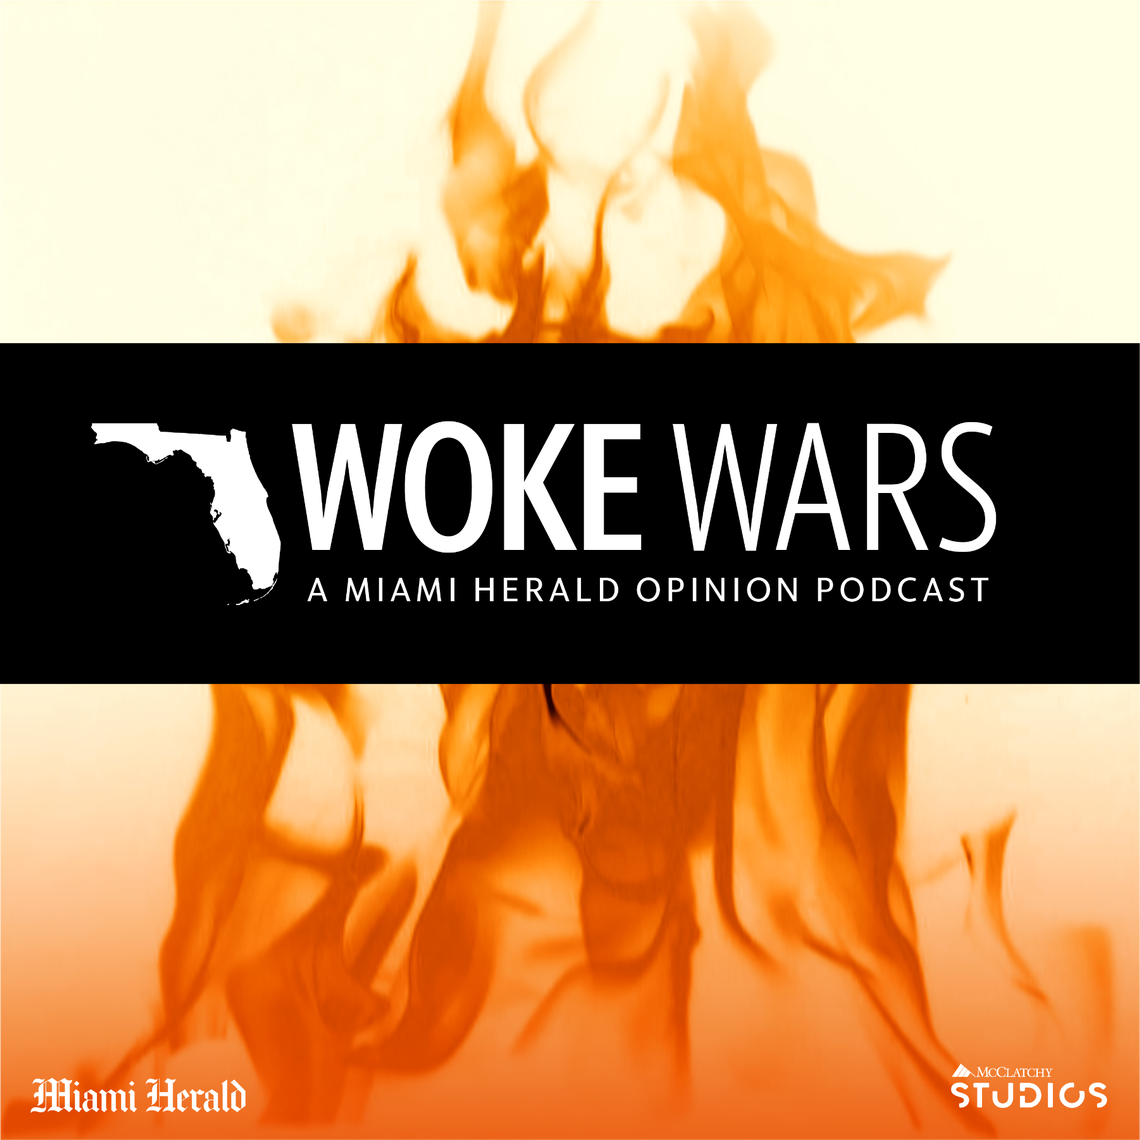 “Woke Wars” is a new opinion podcast by the Miami Herald Editorial Board.